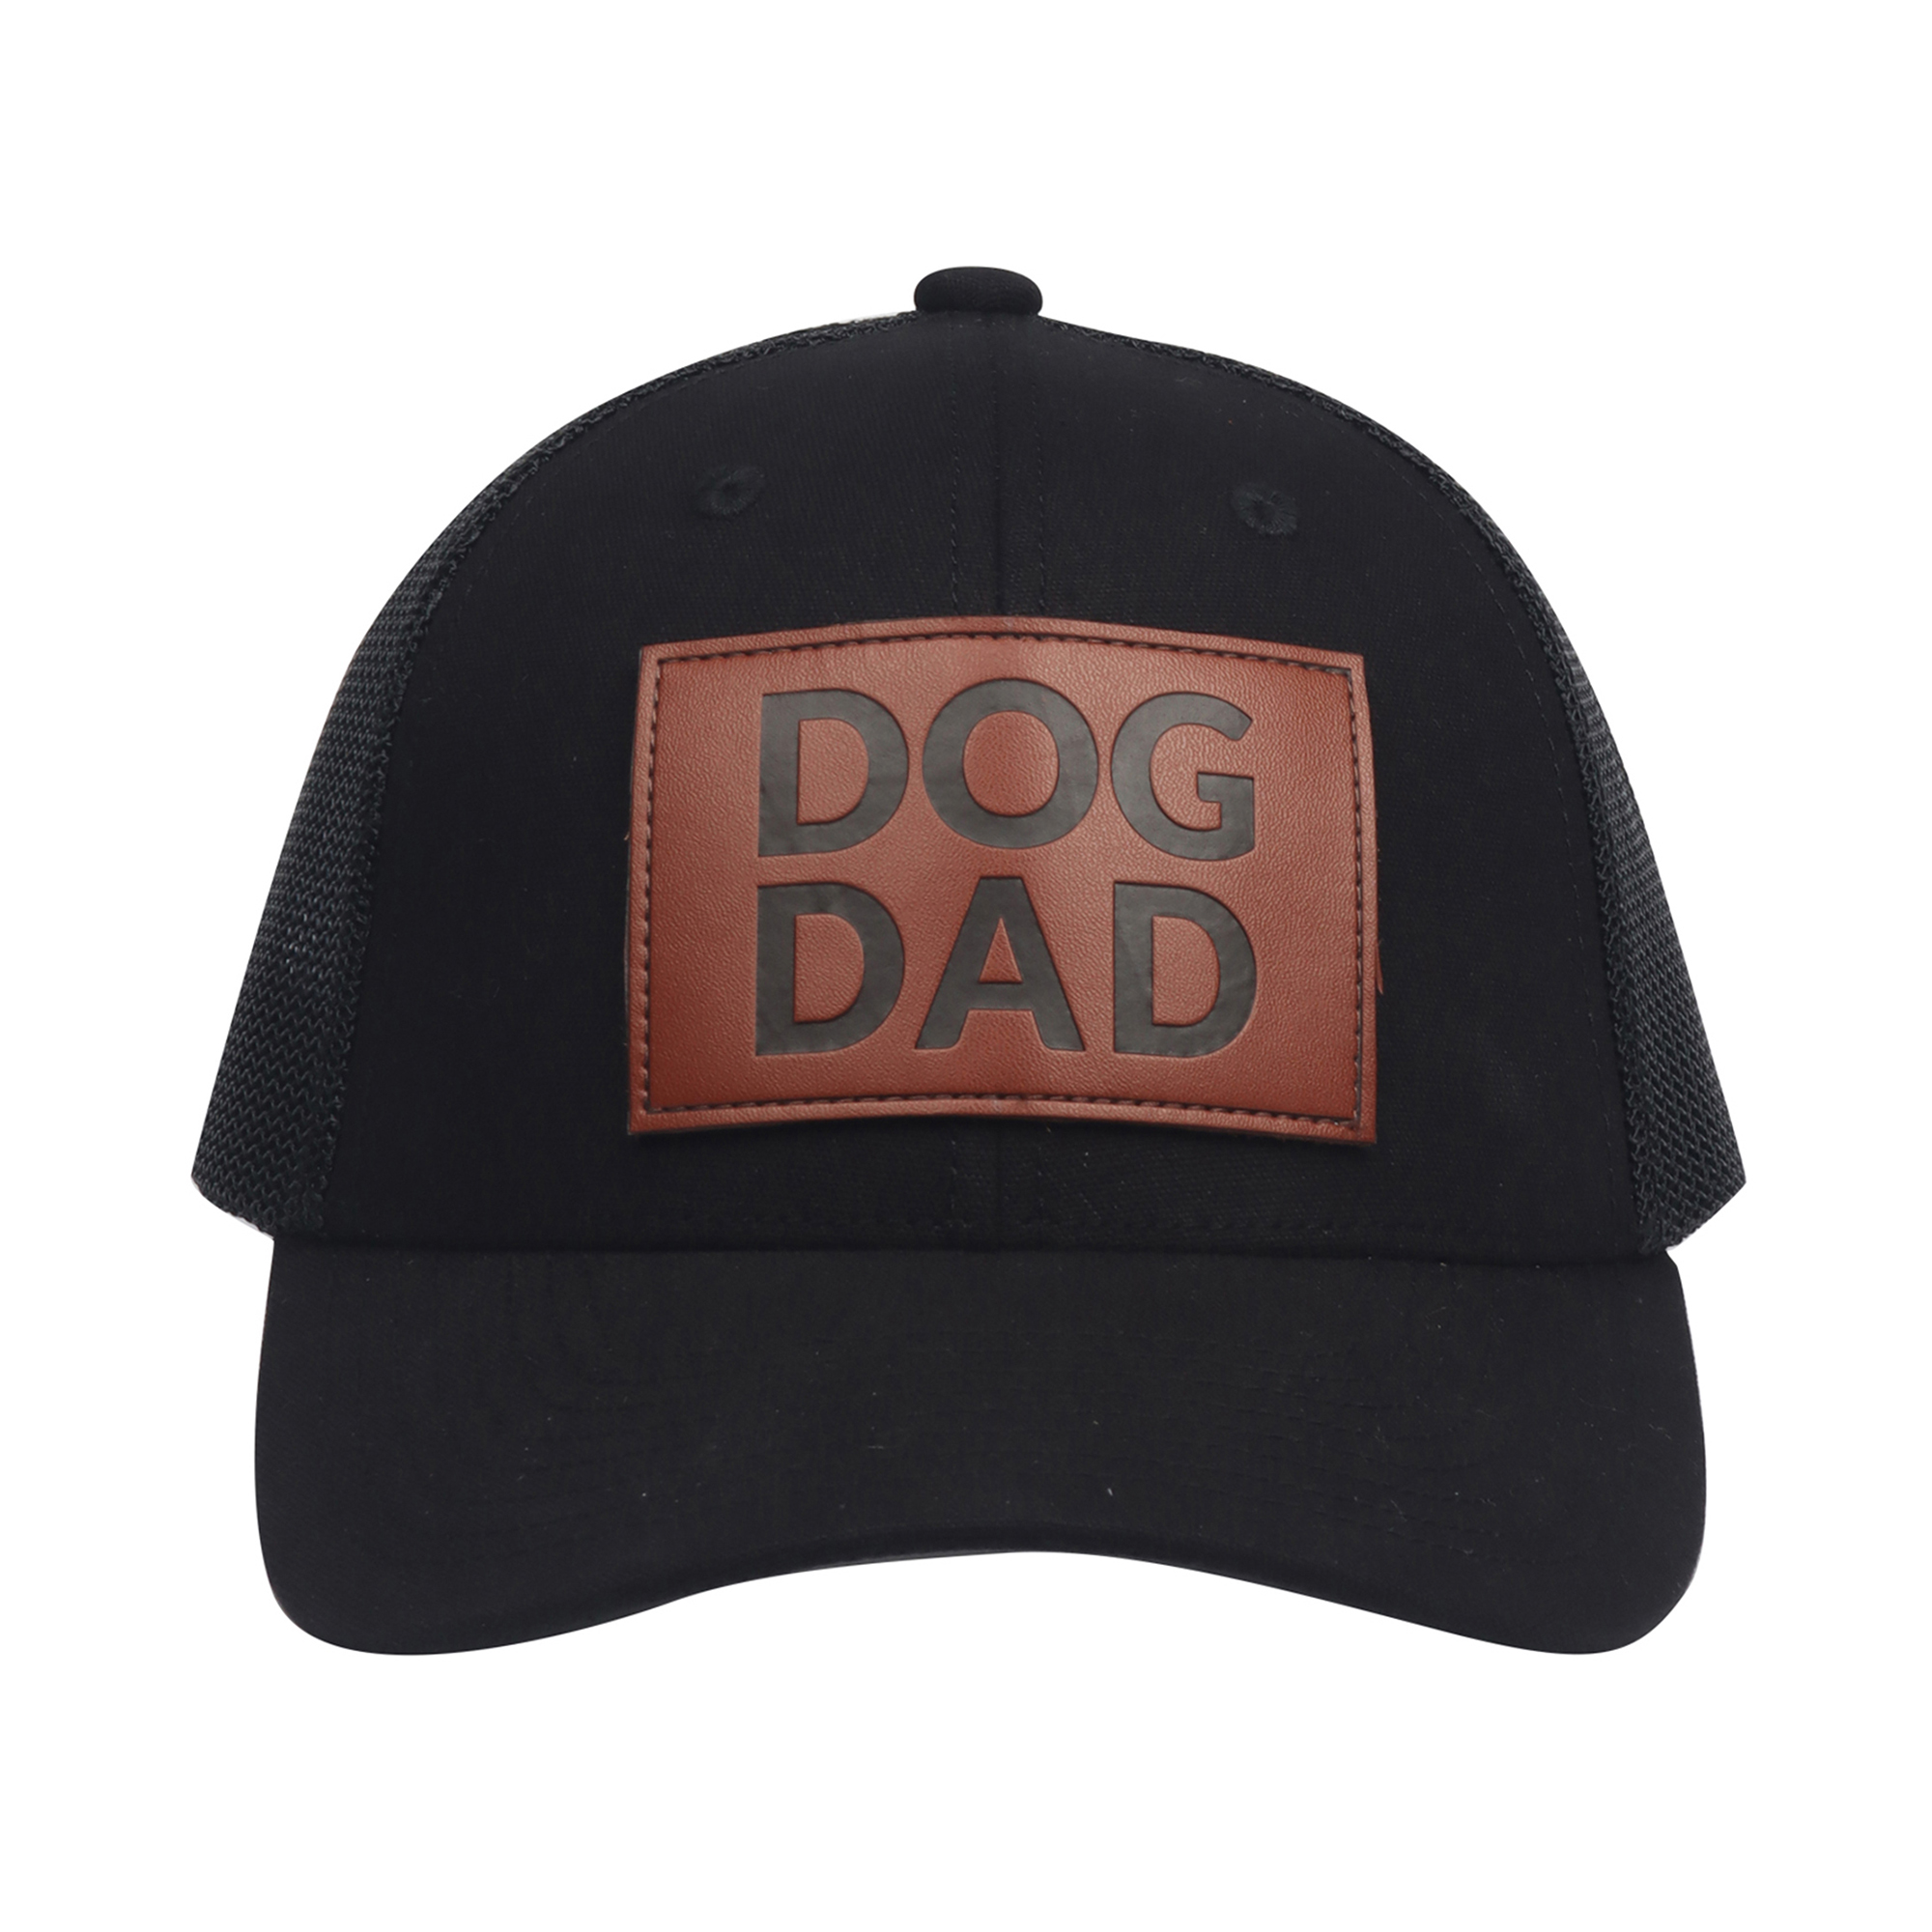 HATODM Leather Patch Dog Dad Trucker Hat